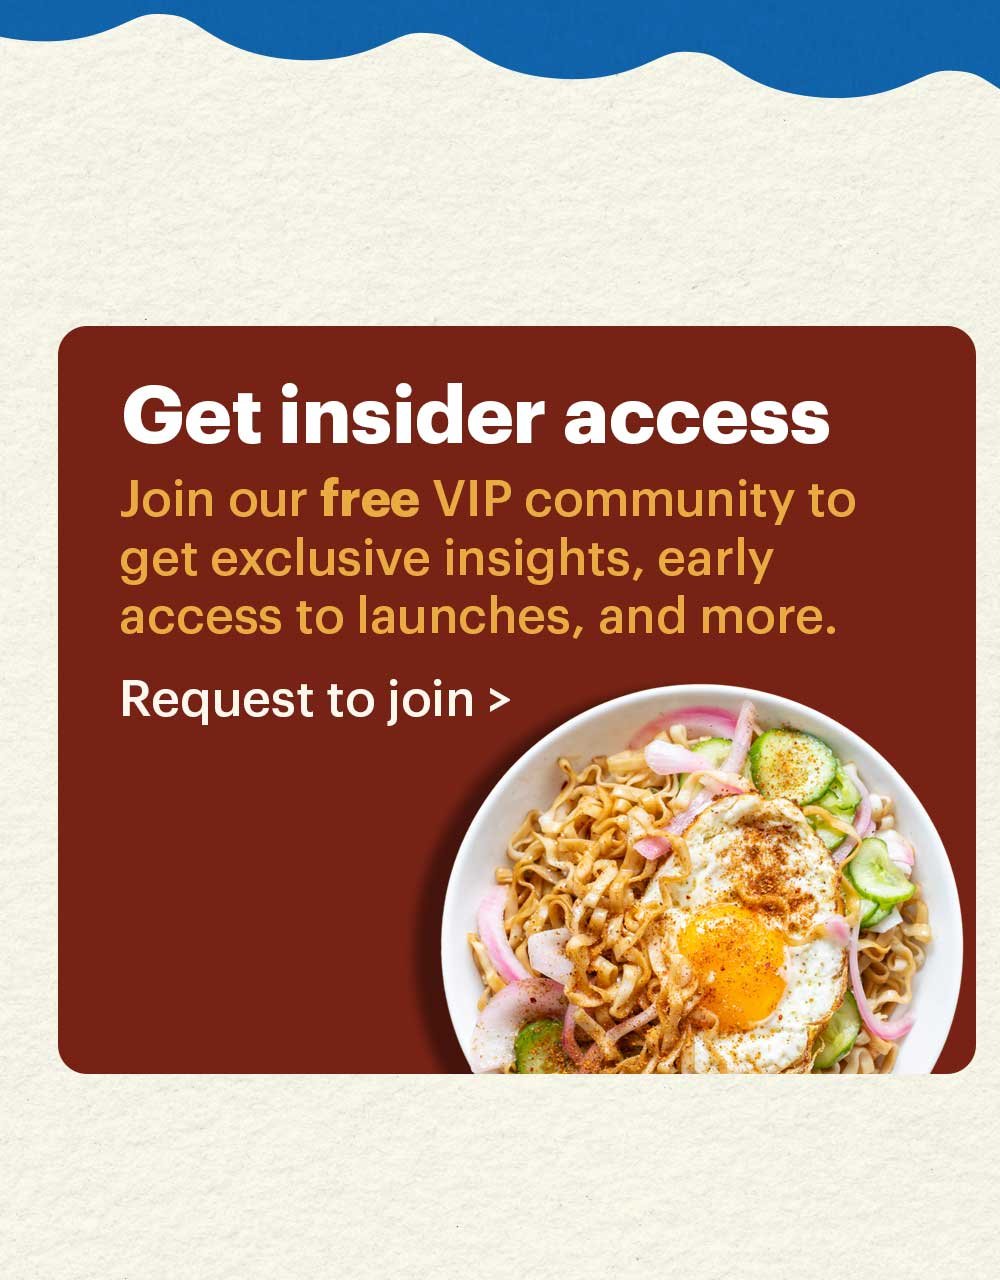 Get insider access. Join our free VIP community to get exclusive insights, early access to launches, and more. Request to join >